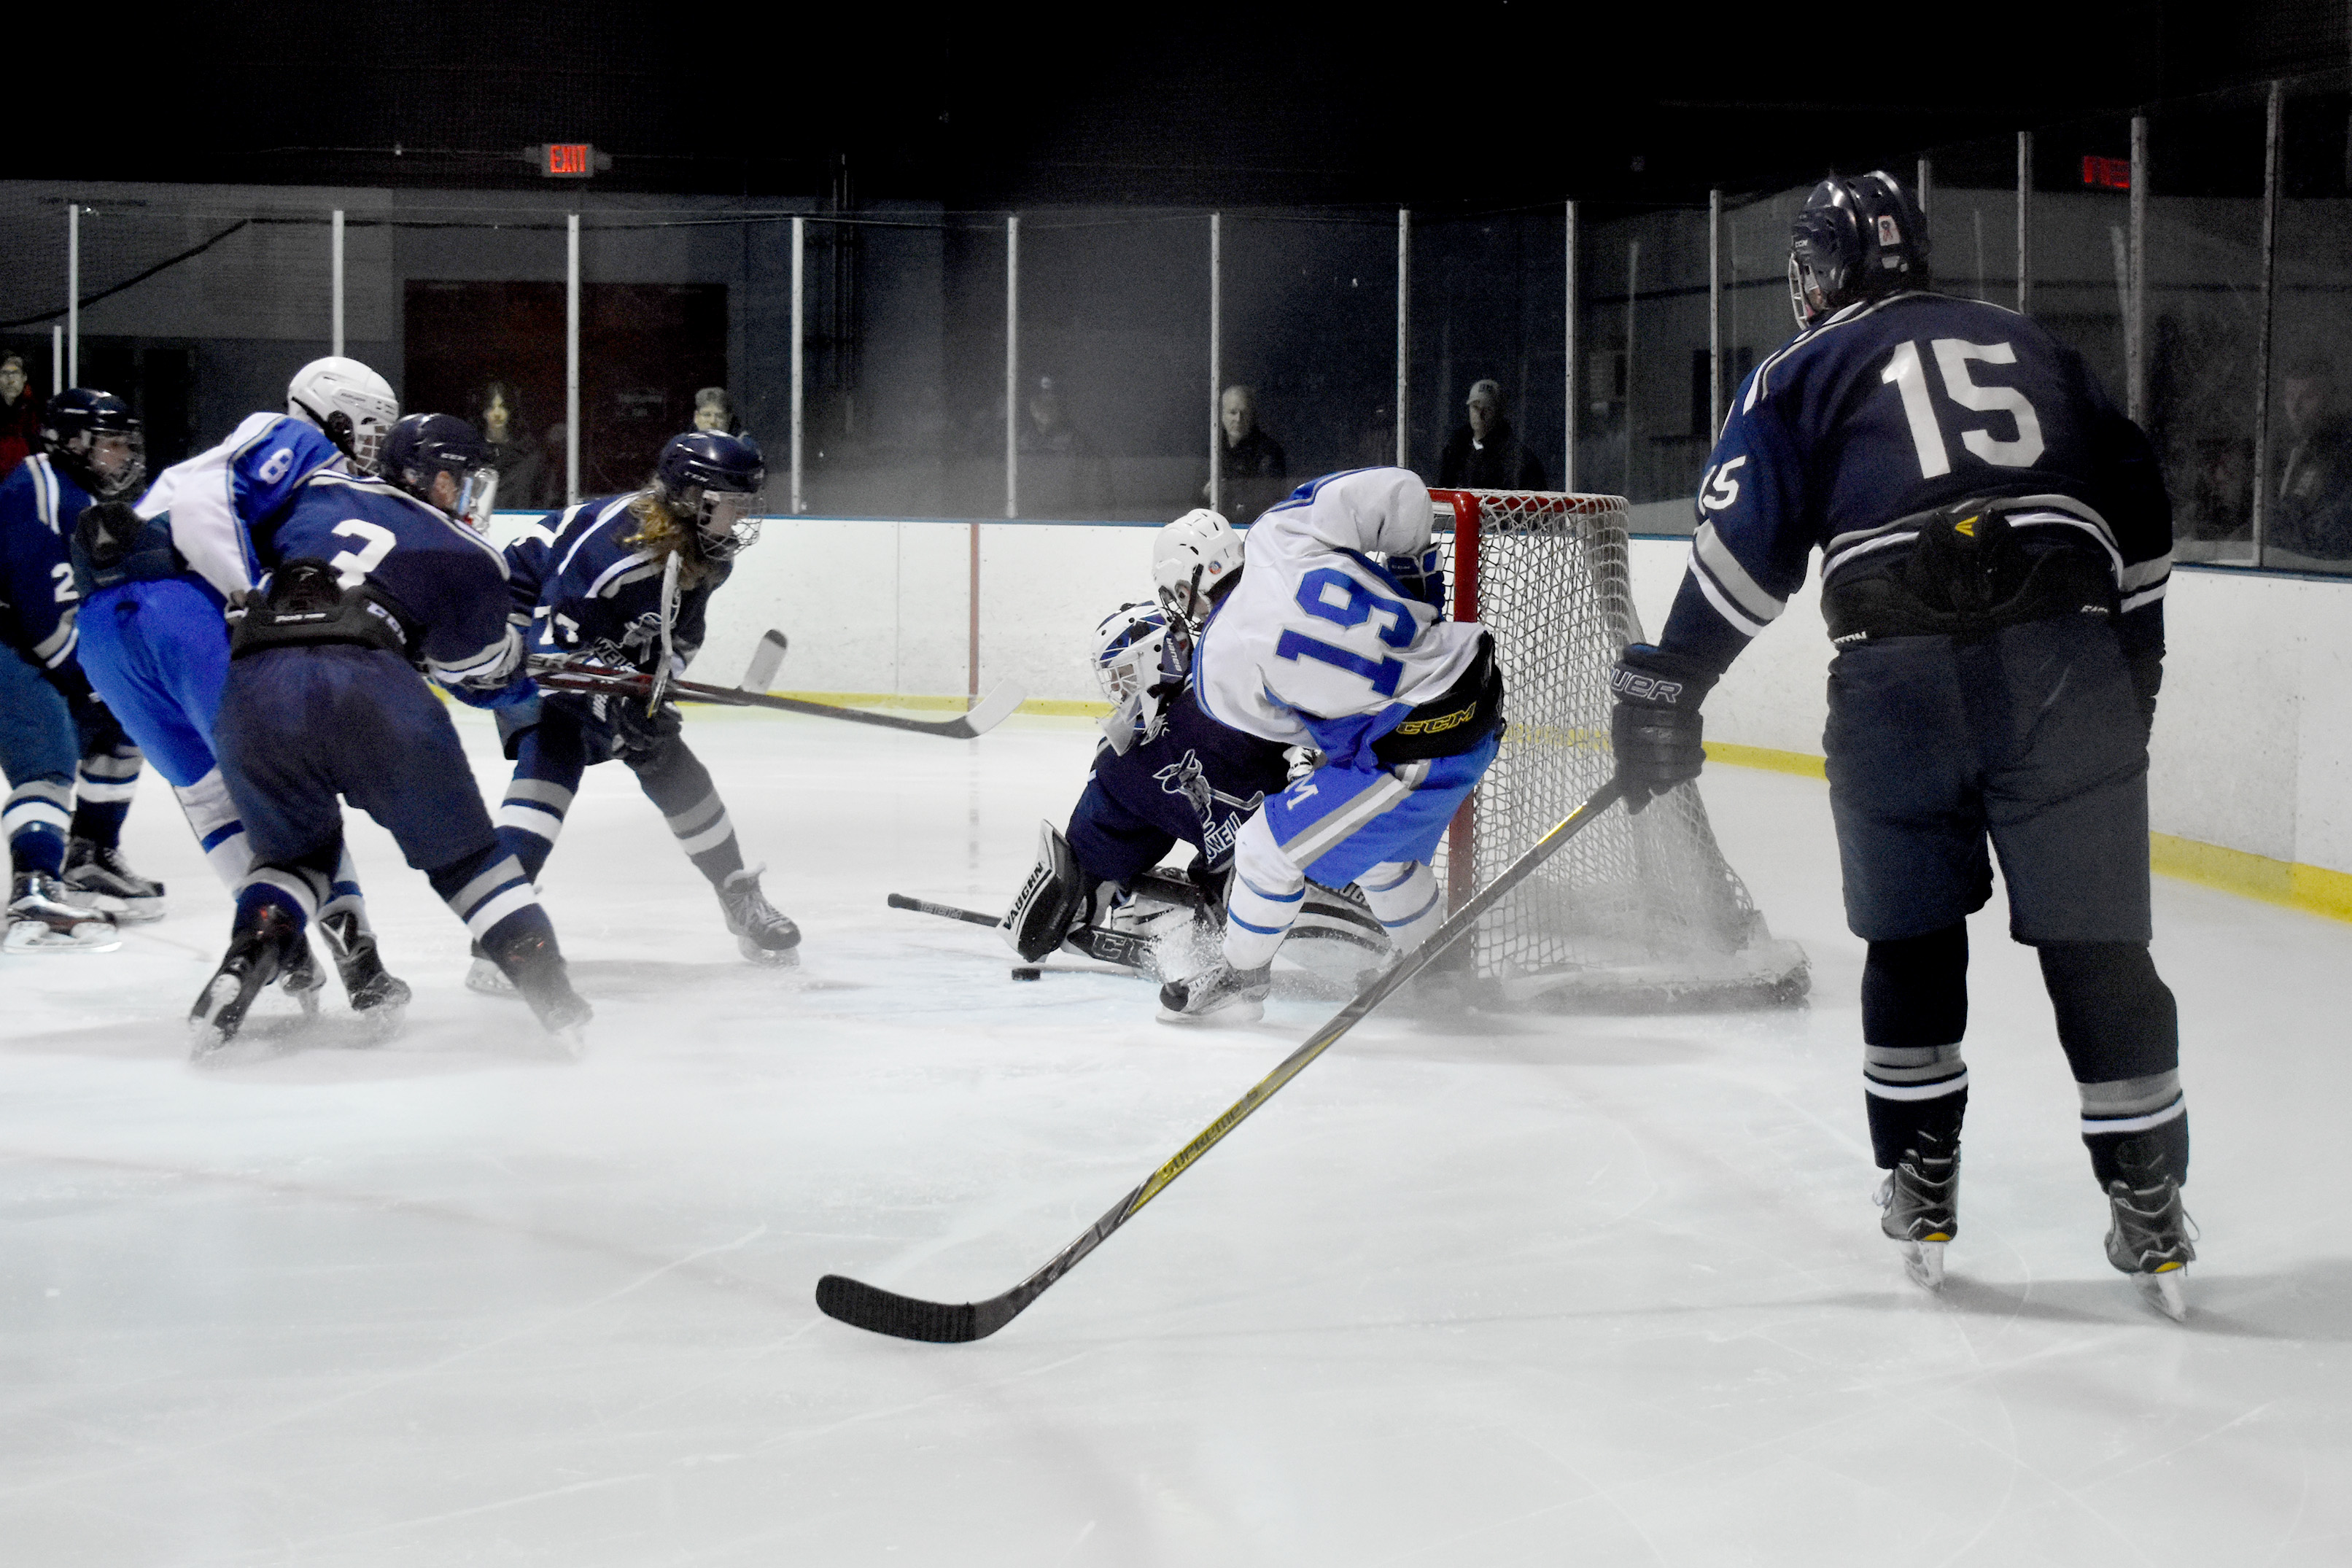 Montclair Hockey: Mounties stay red-hot with shutout win over Howell